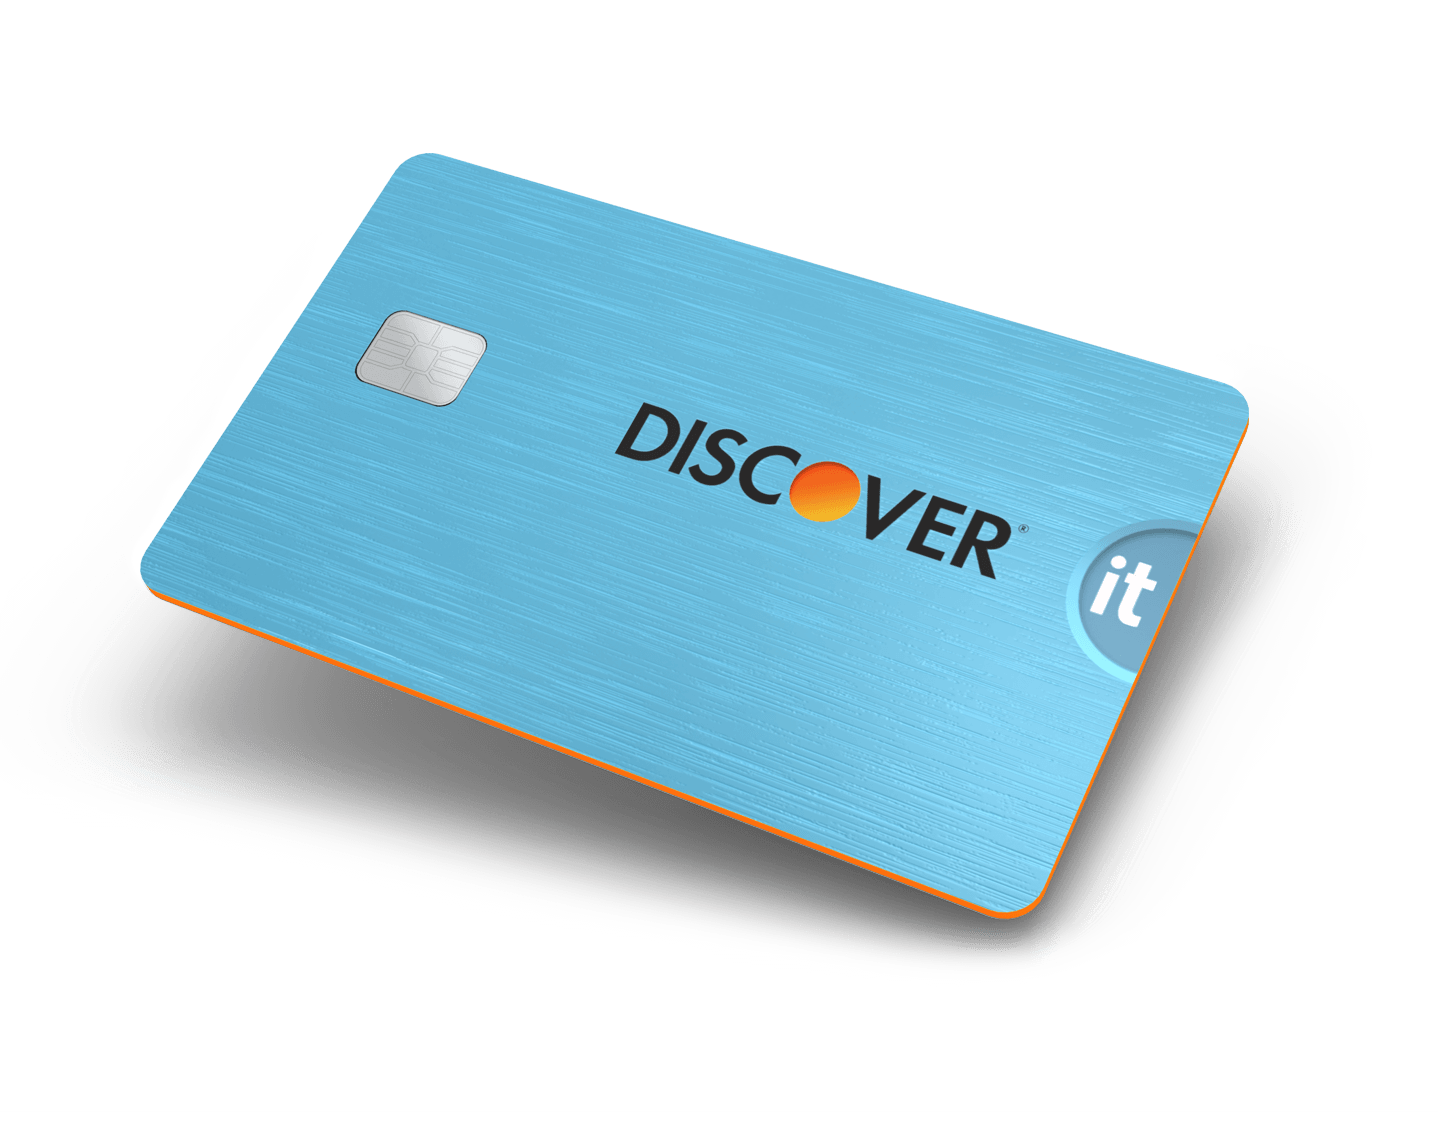 What Does Your Credit Score Need To Be To Get A Discover Card? : Amazon.com: Credit Karma Mobile - Free Credit Score ... - There is a required credit score to get an apple card, which means that not everyone can qualify for the card.